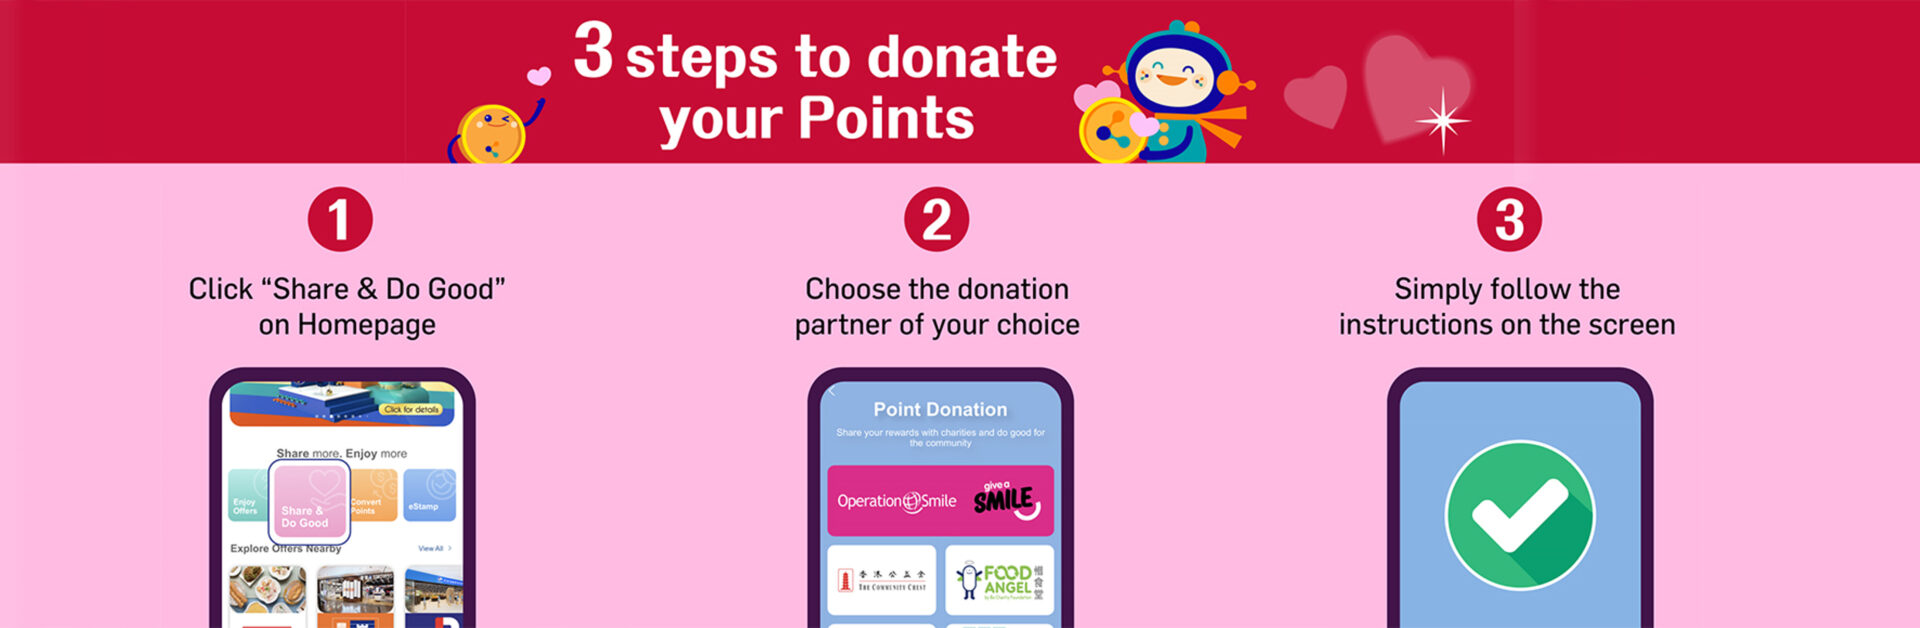 MoneyBack Point Donation